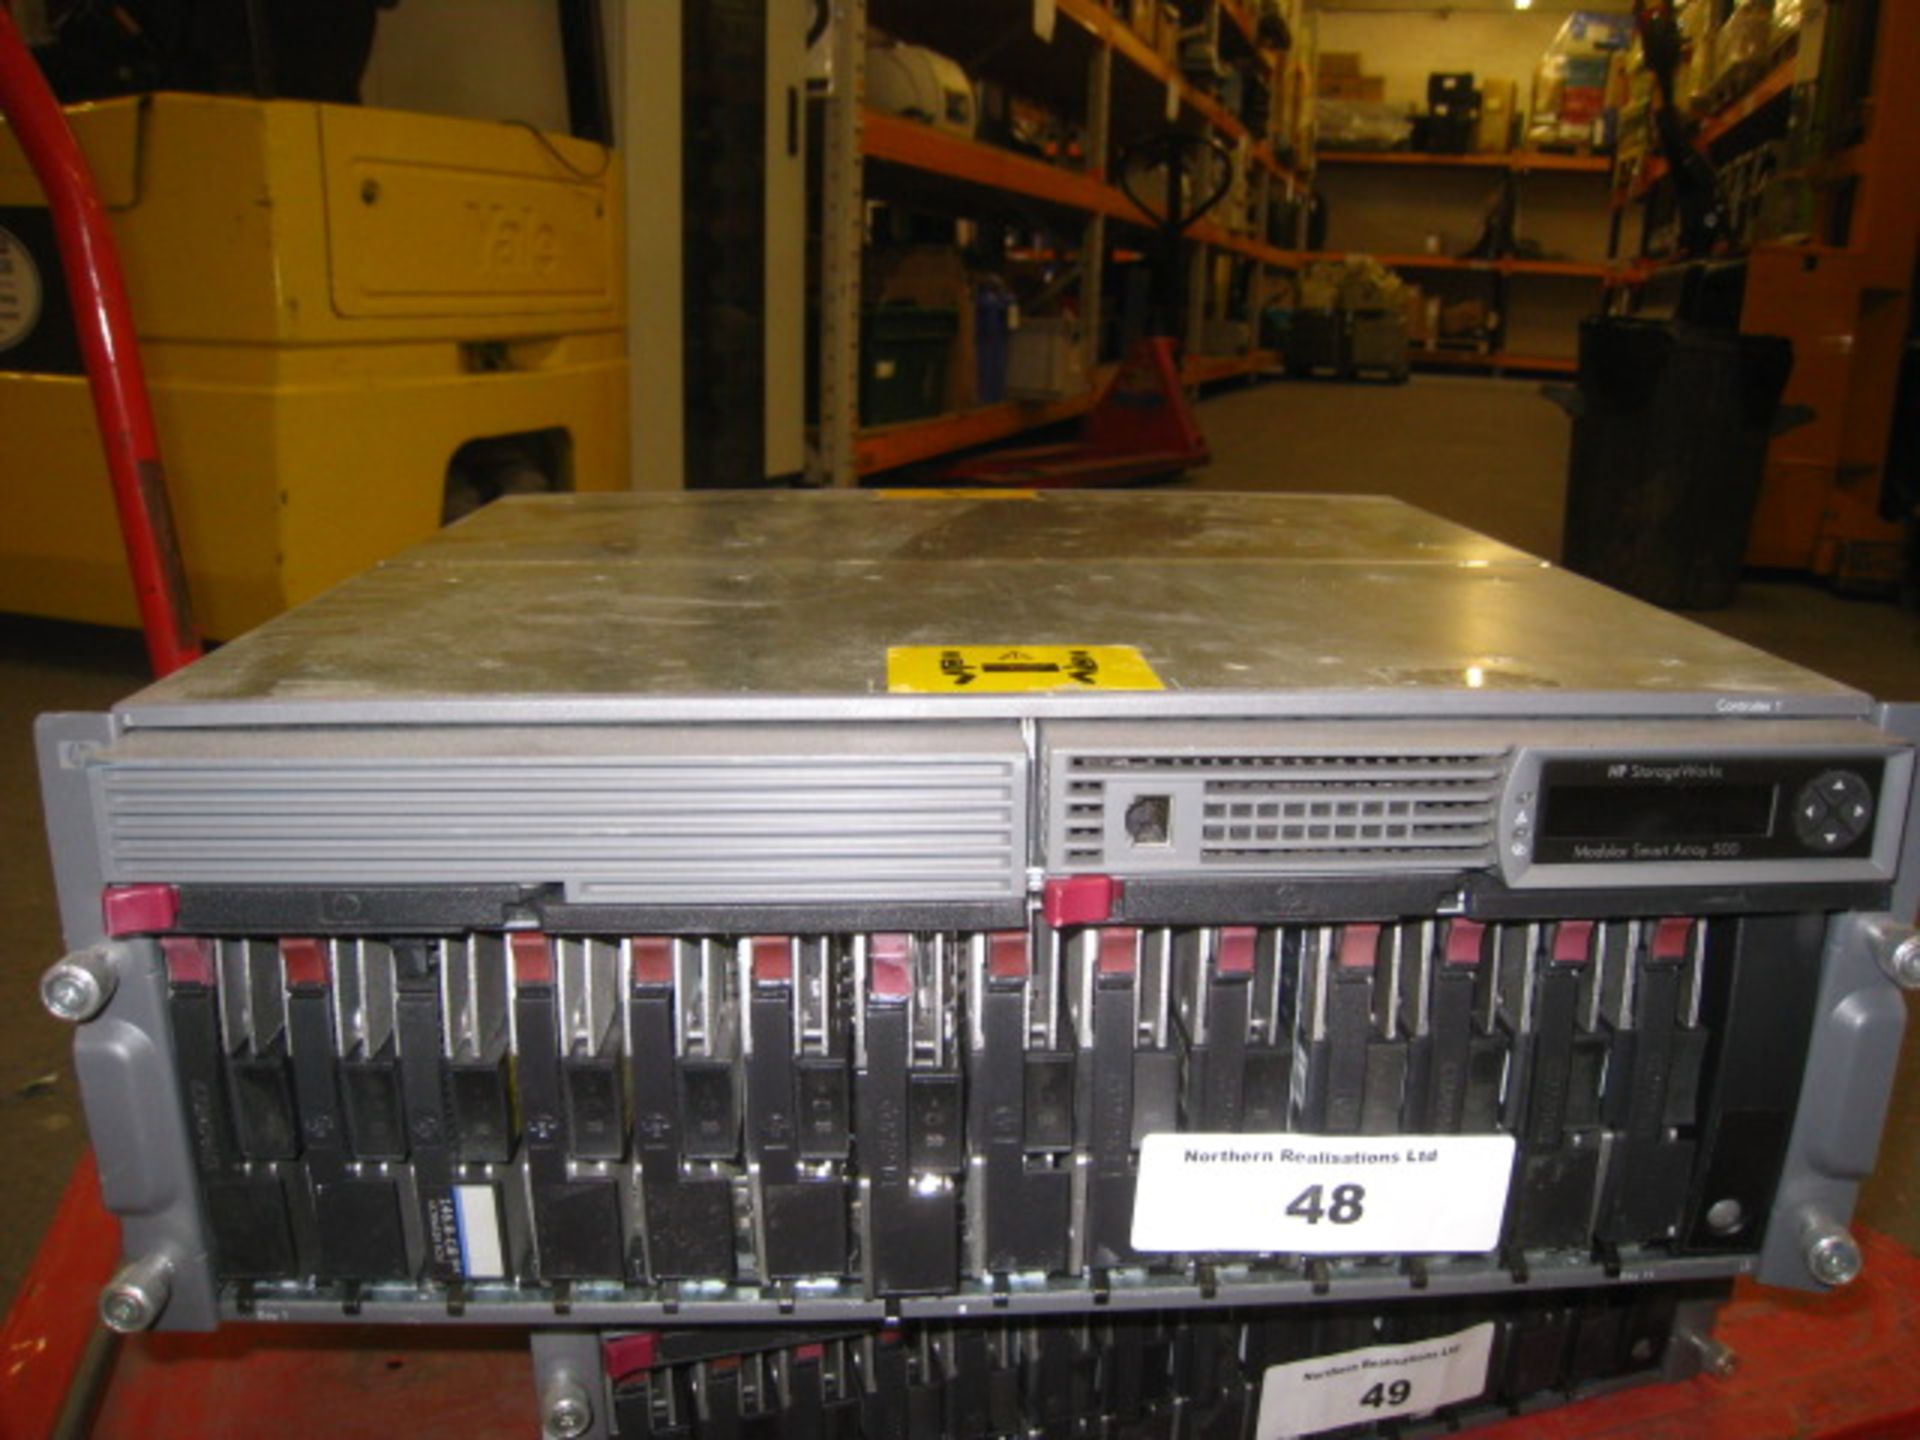 HP STORAGEWORKS MODULAR SMART ARRAY 500 CONTAINING 14 X 146GB HDD'S